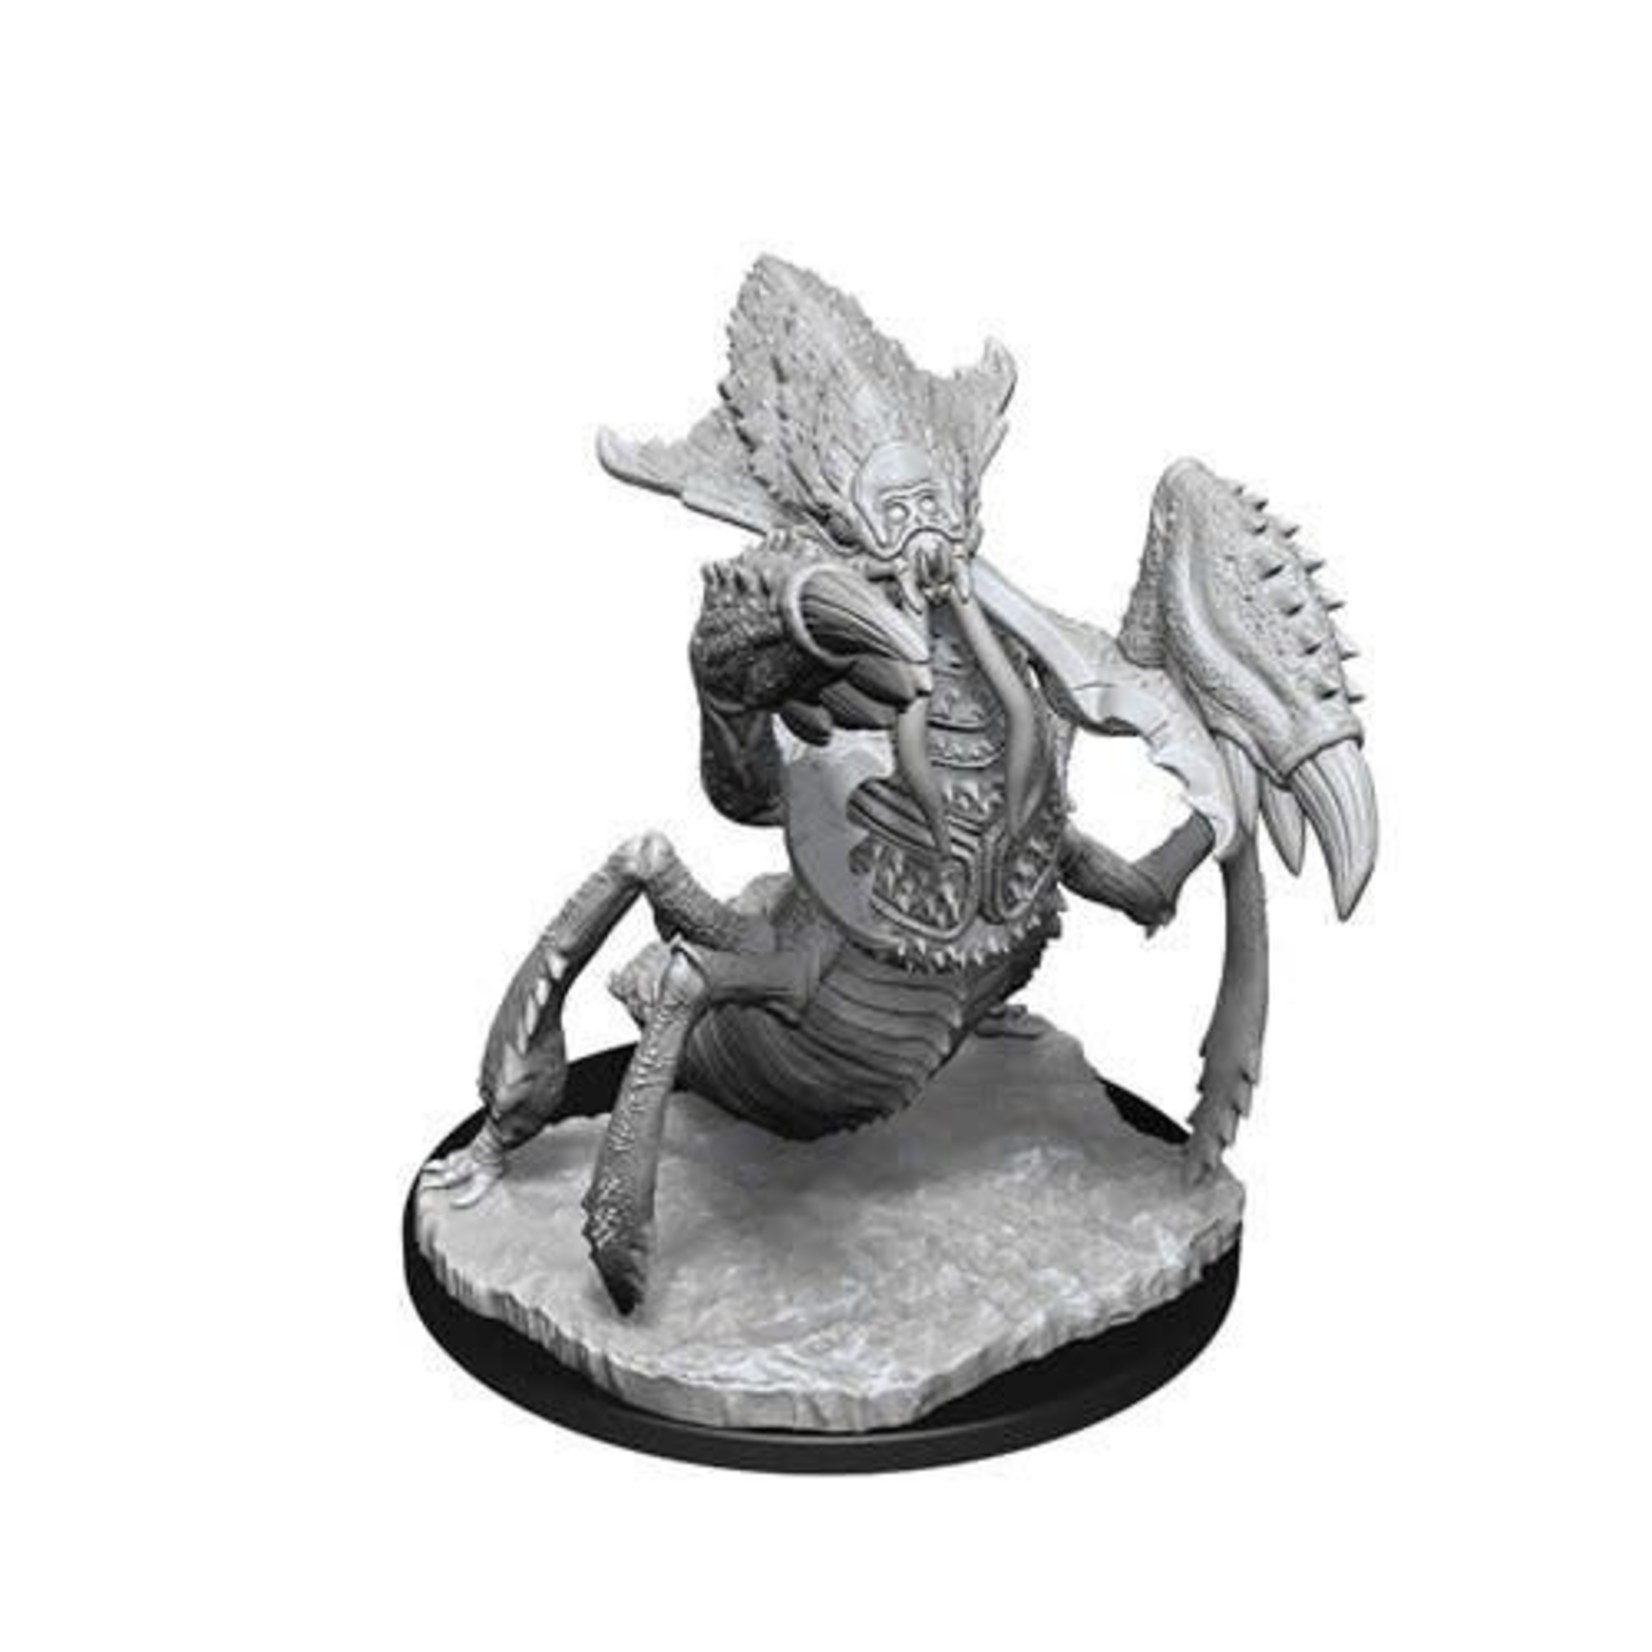 WizKids Dungeons and Dragons Nolzur's Marvelous Minis Ankheg